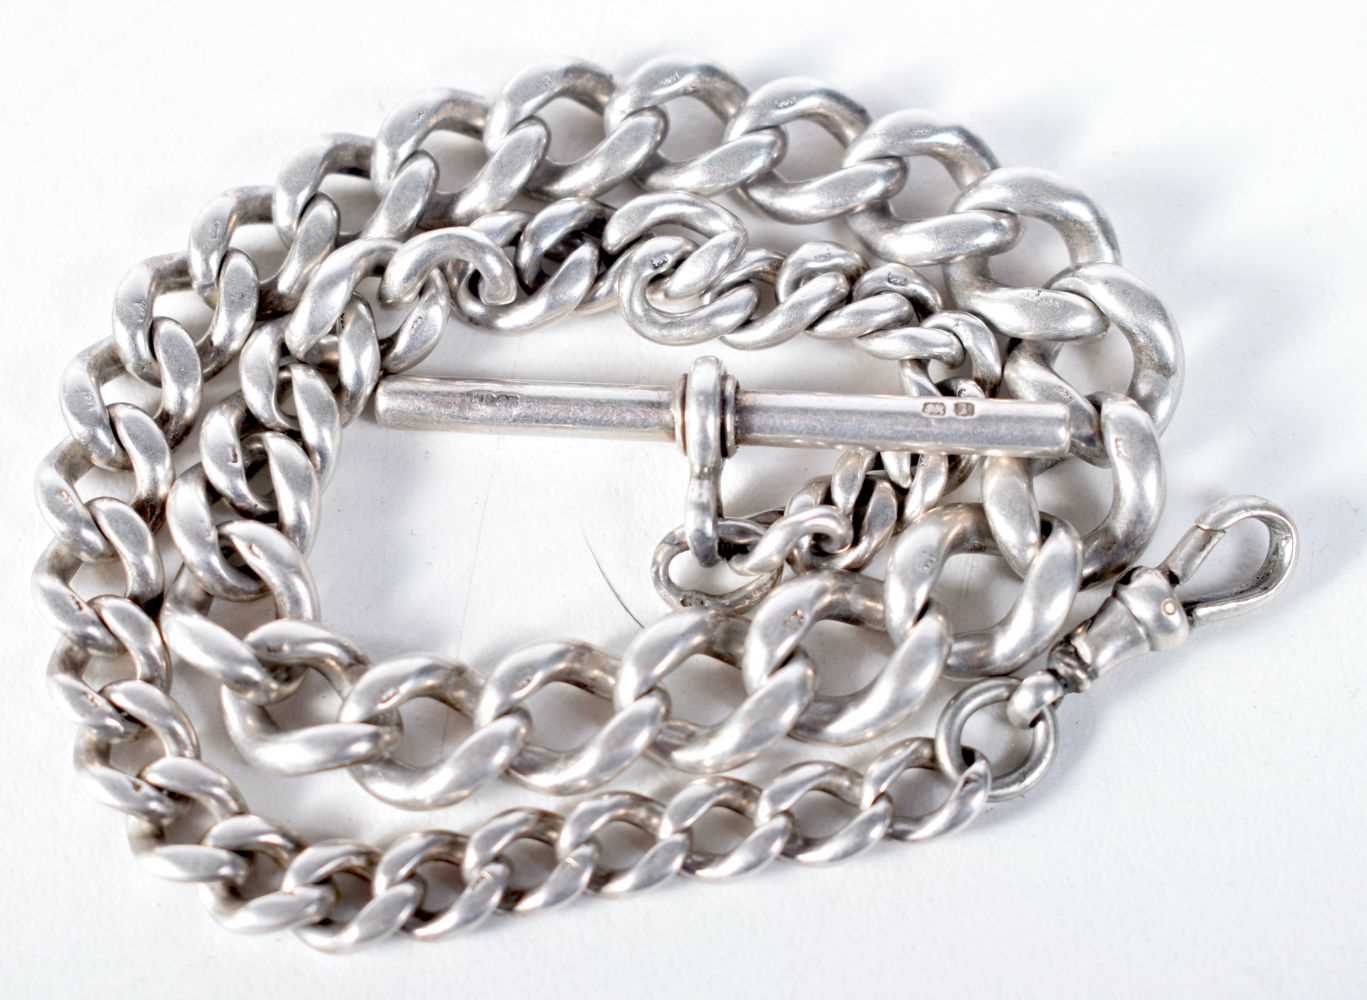 A Silver Watch Chain. Stamped Silver. 33 cm long, weight 46.6g